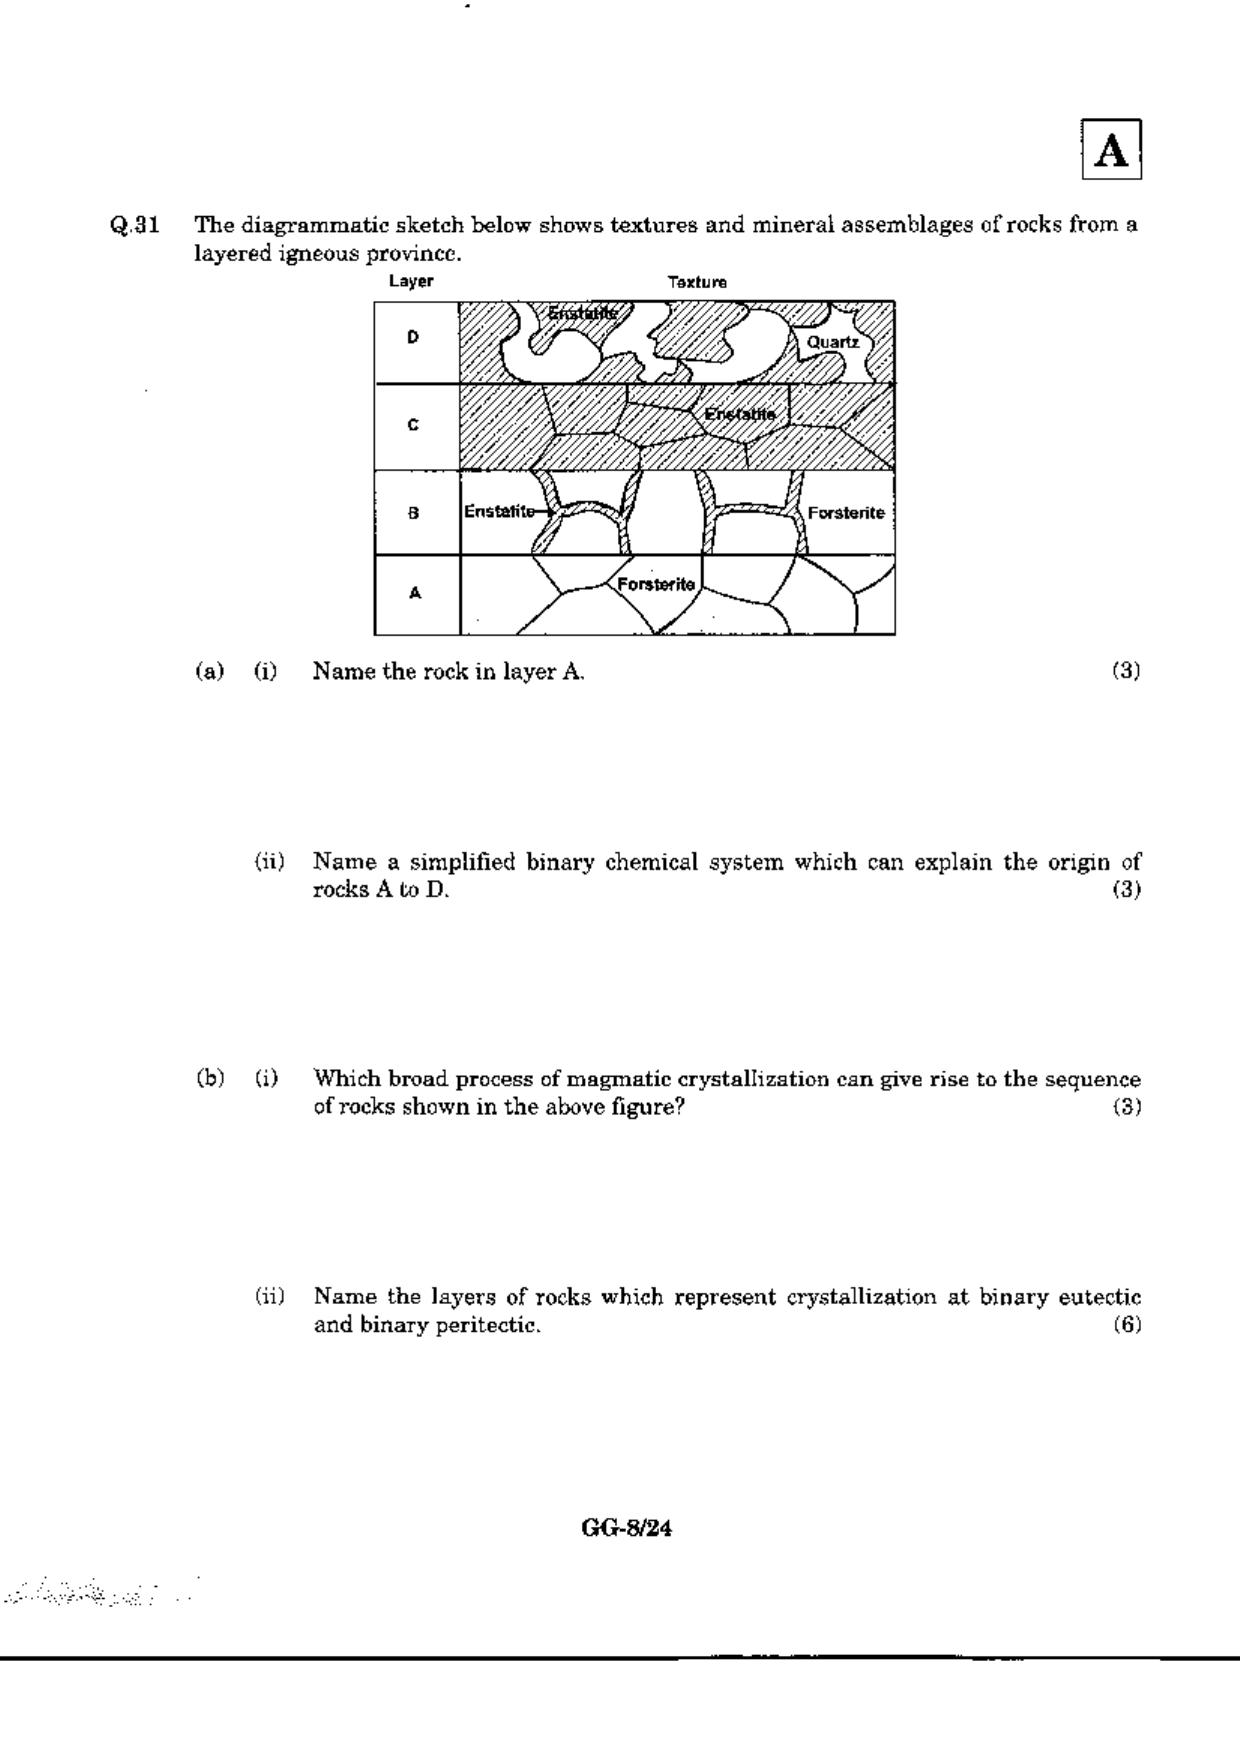 JAM 2010: GG Question Paper - Page 10